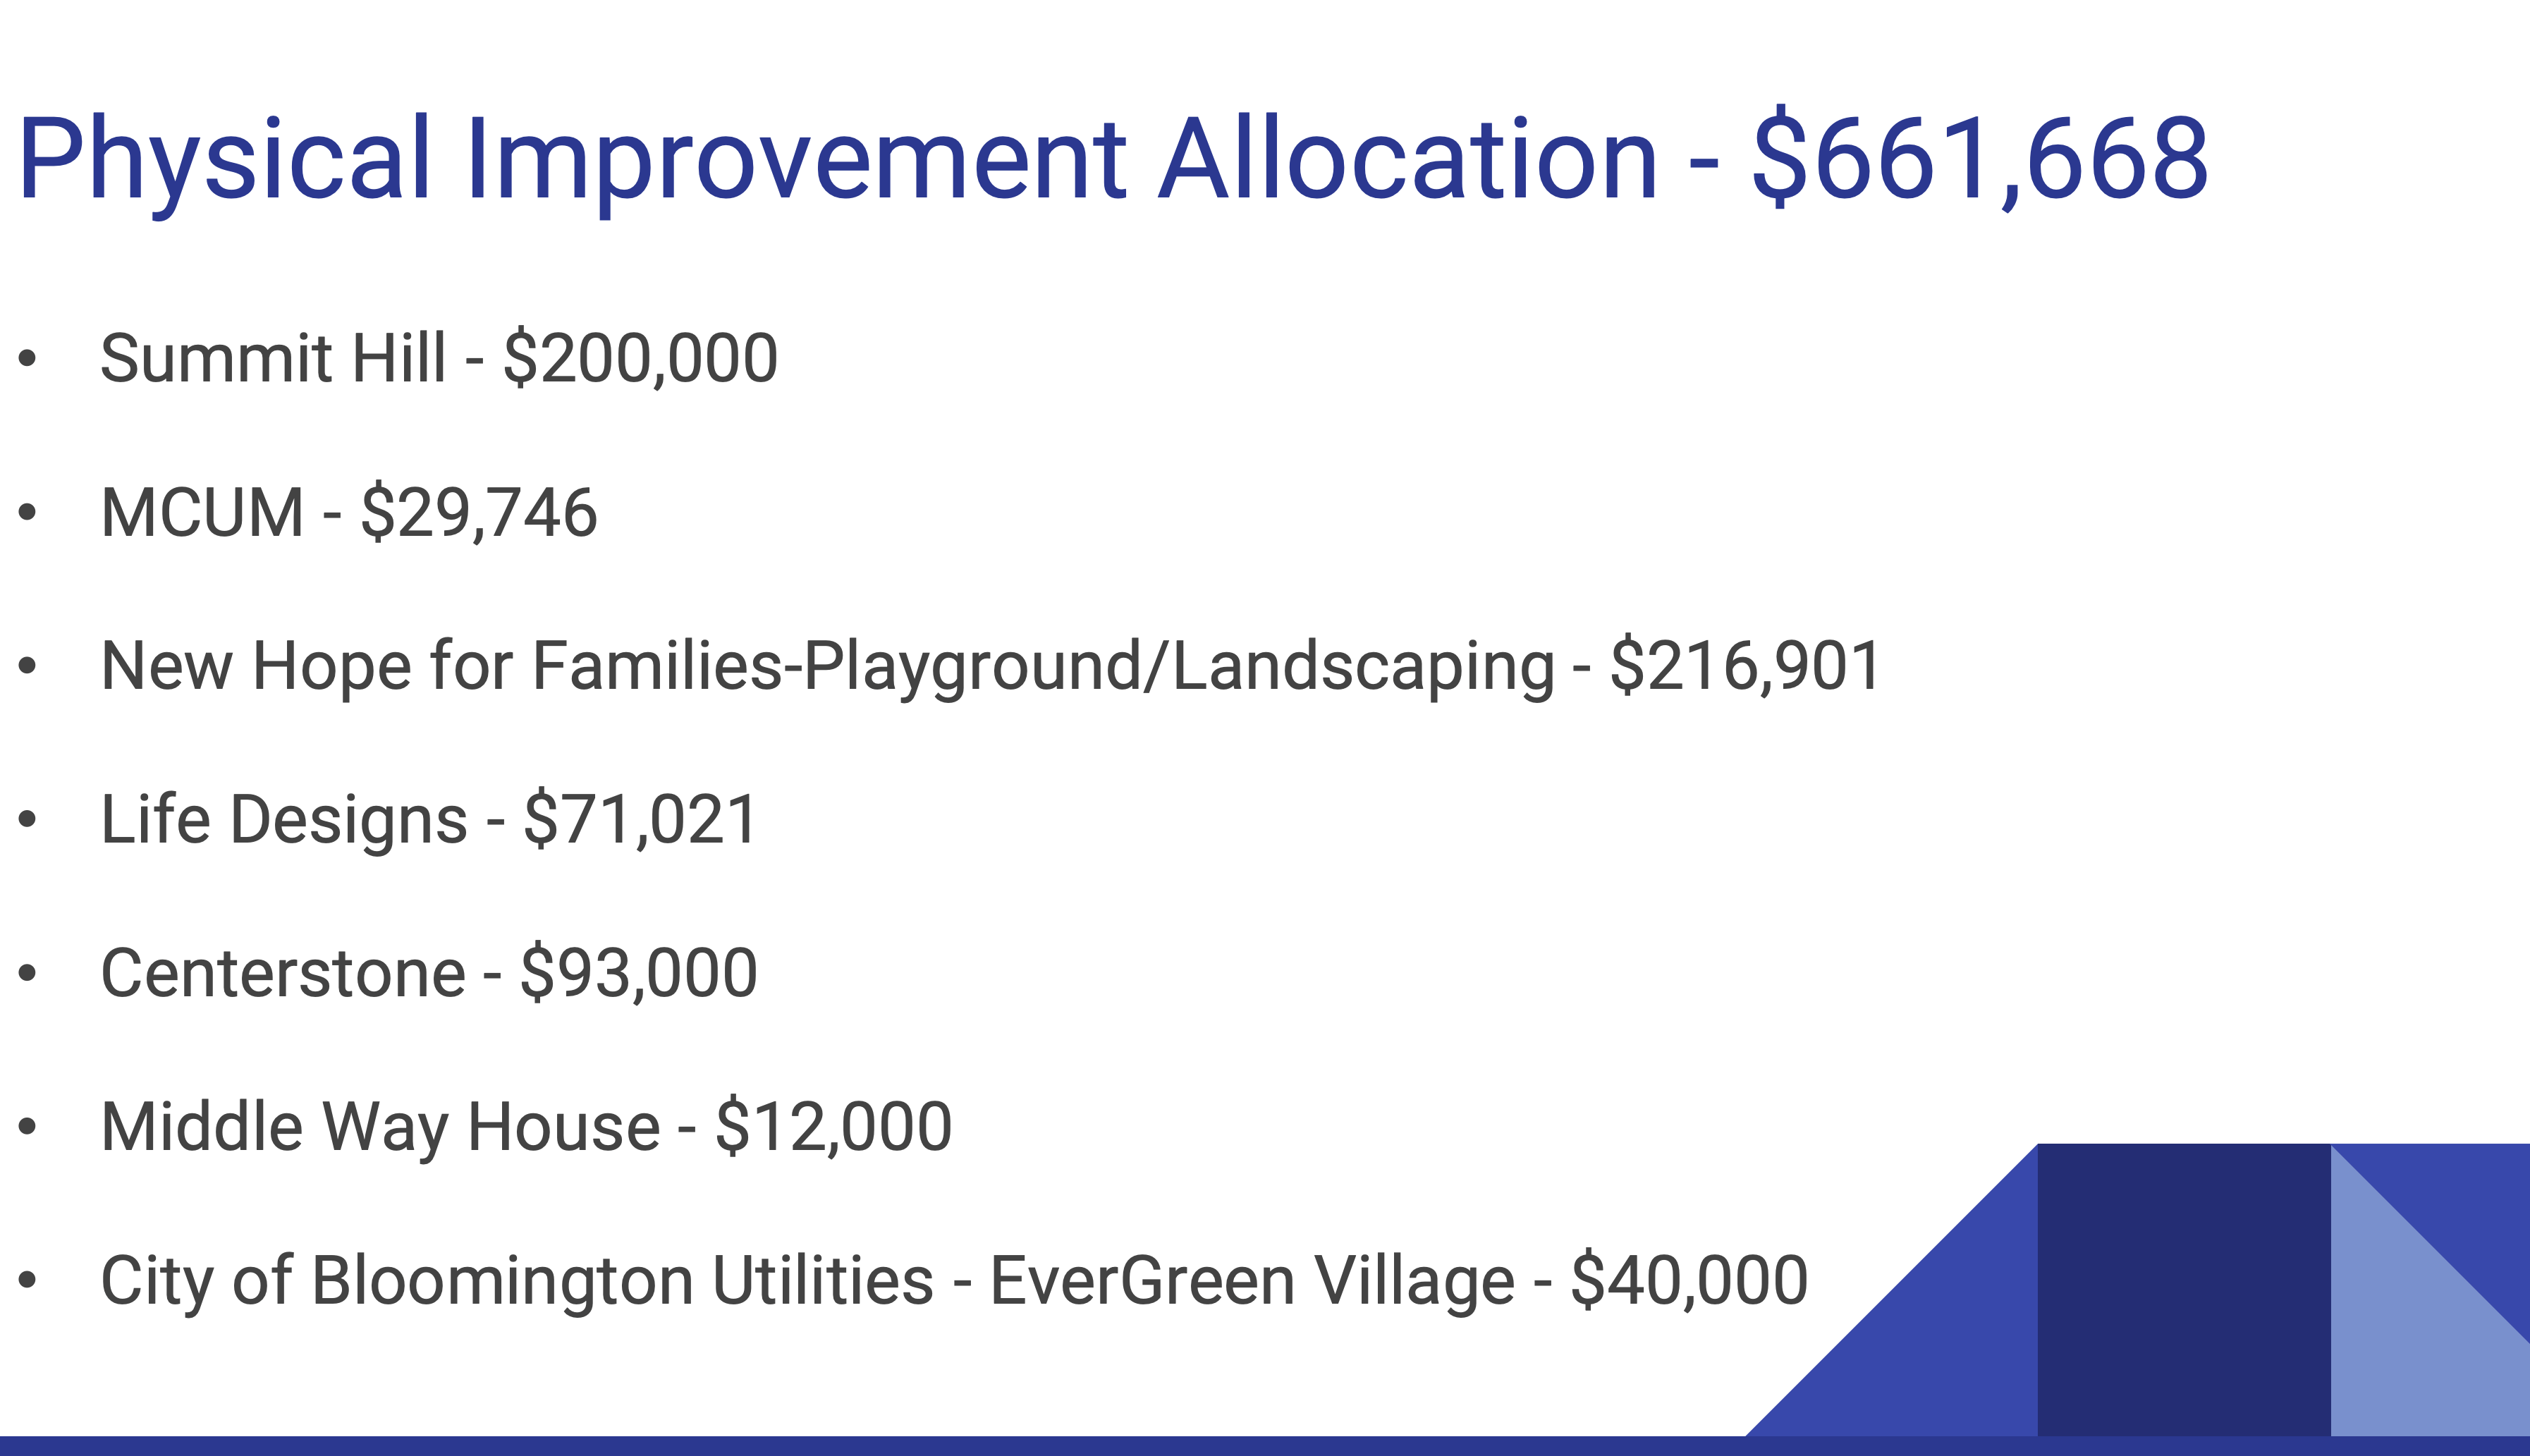 A screenshot of the grant's funding toward physical improvements.